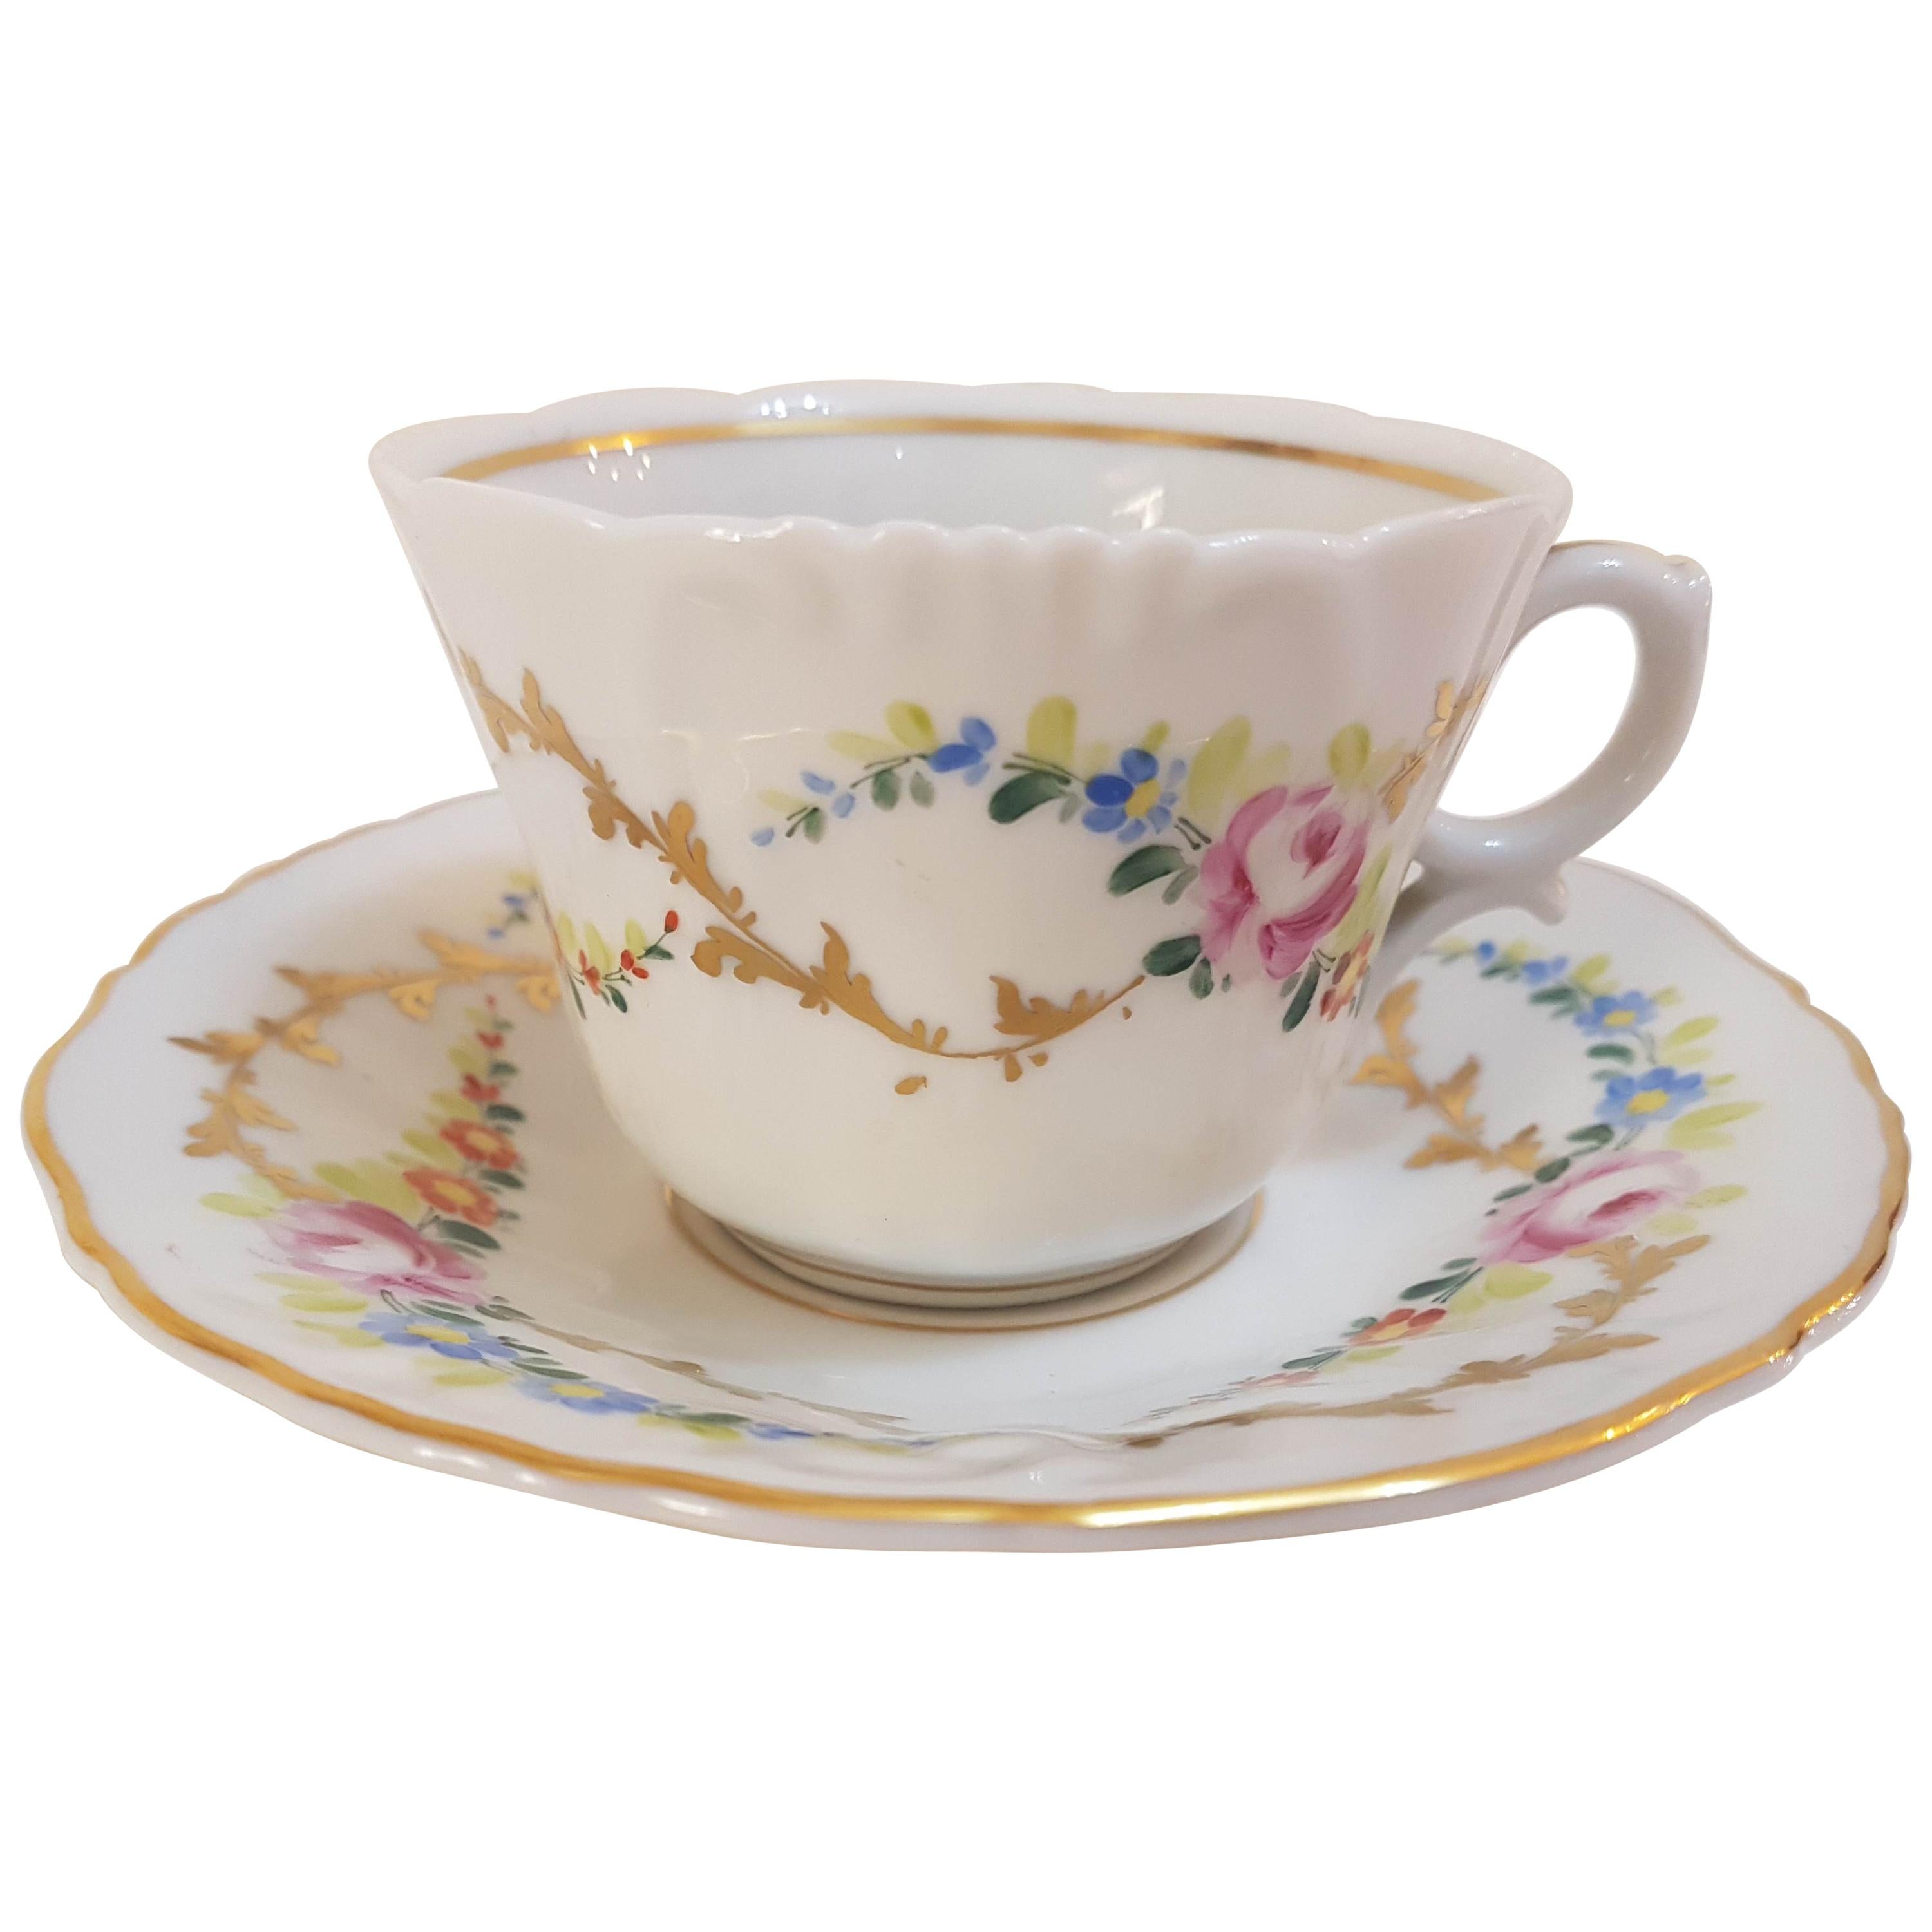 20th Century Hand-Painted Vista Alegre Porcelain Collectible Tea Cup and Saucer